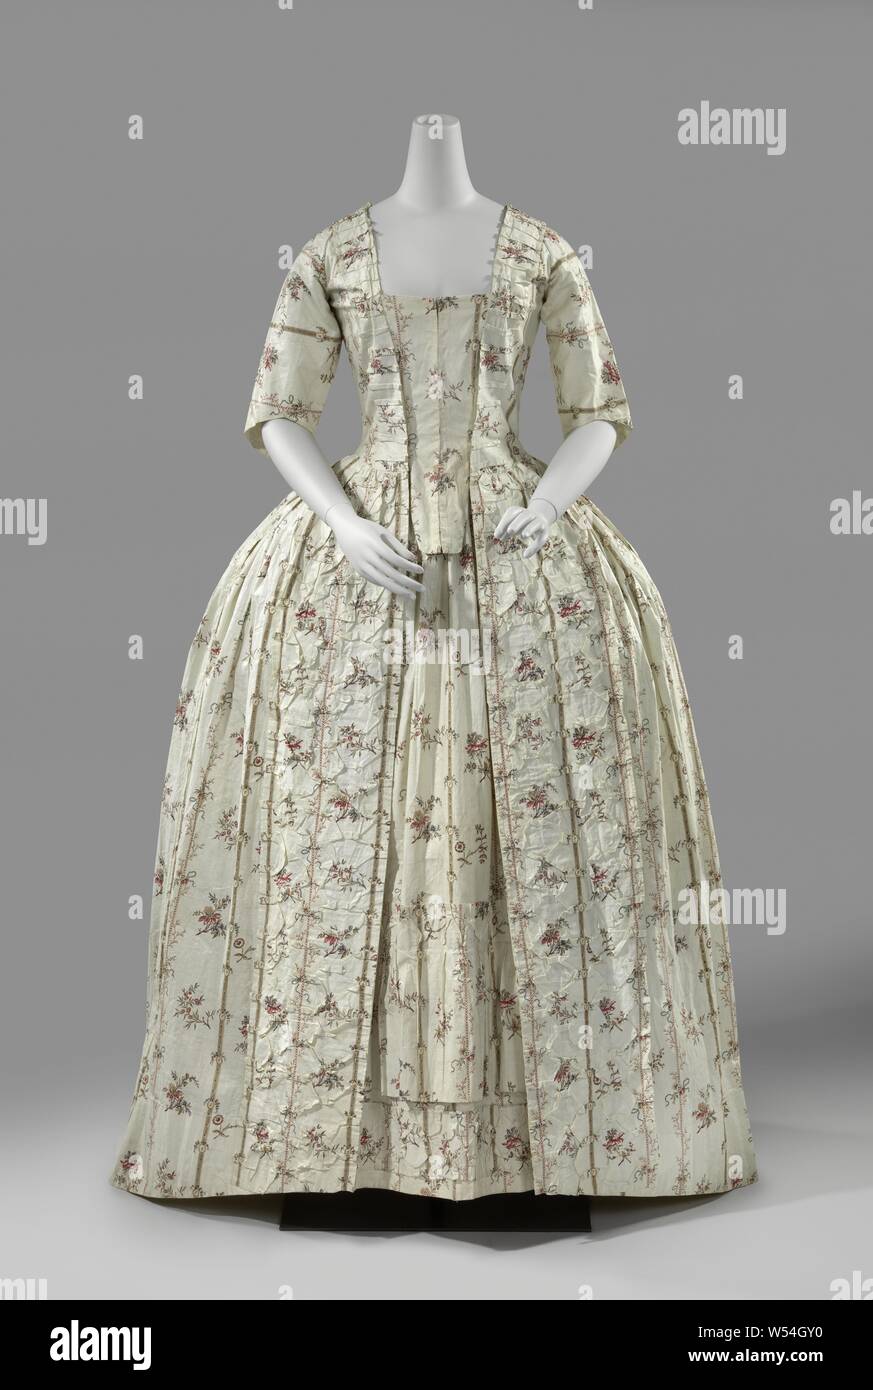 Sack-Back Gown (robe à la française) Dress Made of Printed Fabric, Ladies' Costume, 'demi-parure' of glazed printed cotton with delicately graceful pattern of vertical stripes and scattered bouquets, partially lined and sewn by hand. The suit, which is intended to be worn over a wide flattened hoop skirt ('panier'), consists of two parts: 1) a straight four-lane skirt with two hip slits for pockets, sewn into the back of the deep contiguous pleats at the waistband, probably in far apart pleats sewn on either side of a smooth middle section (is now modernized with wrinkles [1946]) Stock Photo